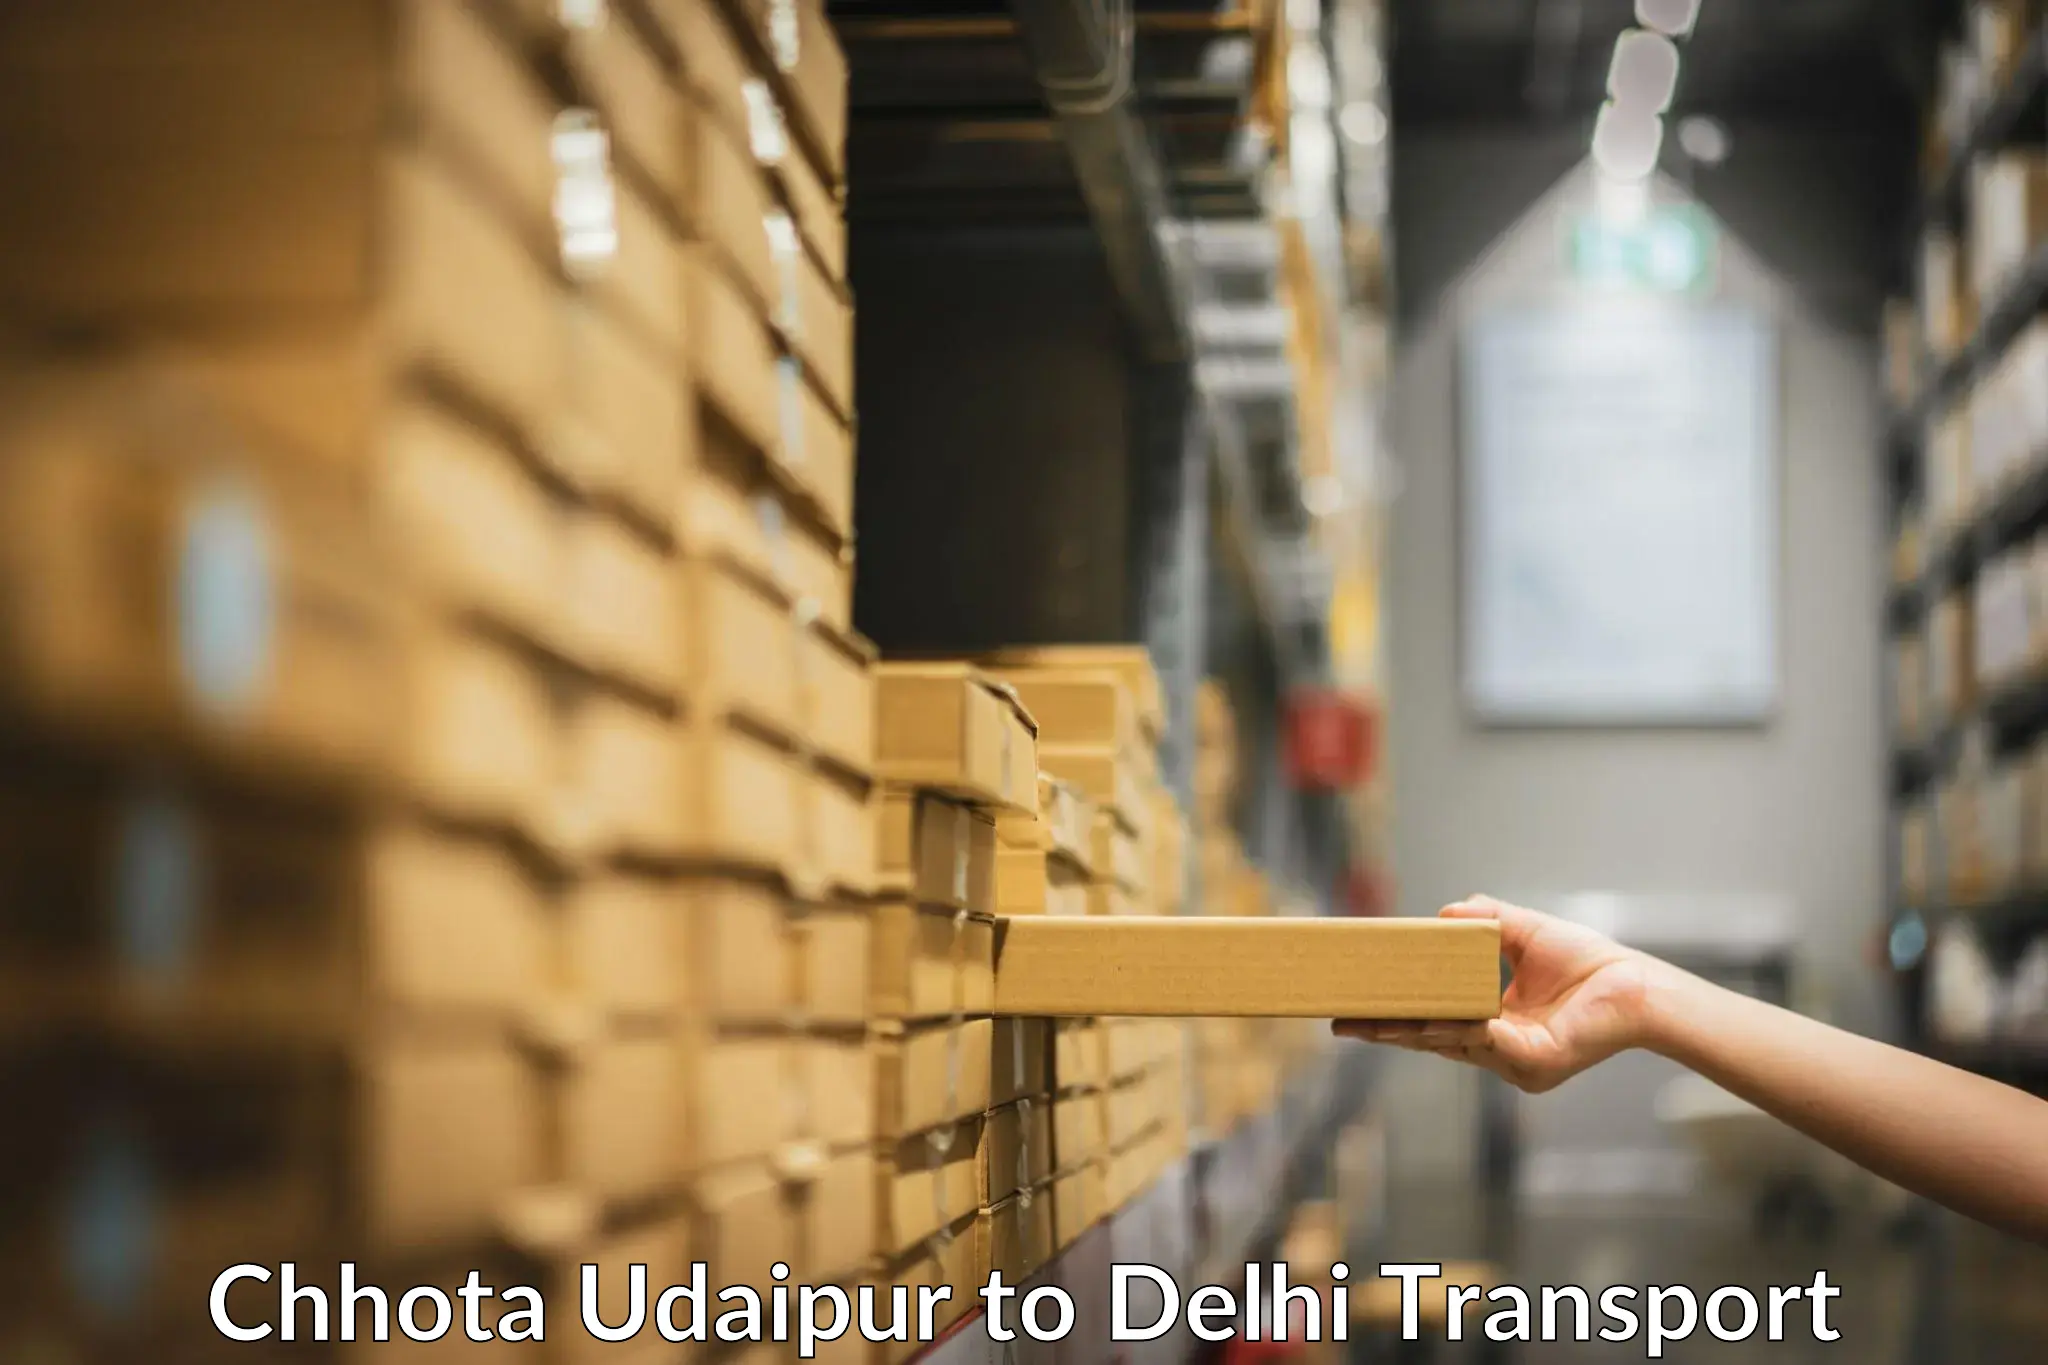 Road transport online services Chhota Udaipur to Delhi